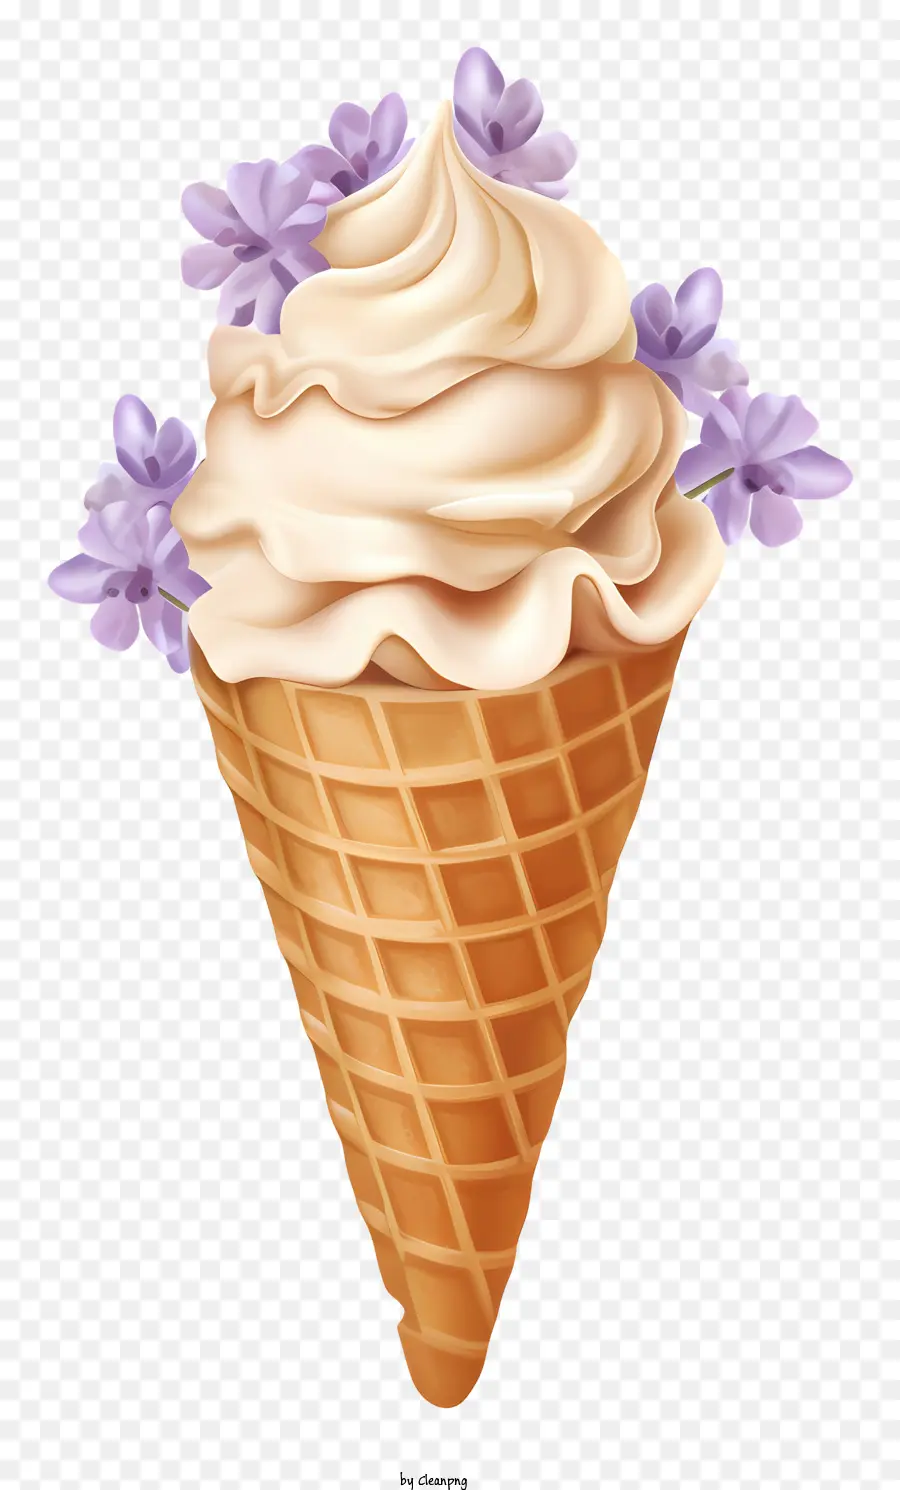 ice cream cone whipped cream purple lavender black and white image light and fluffy